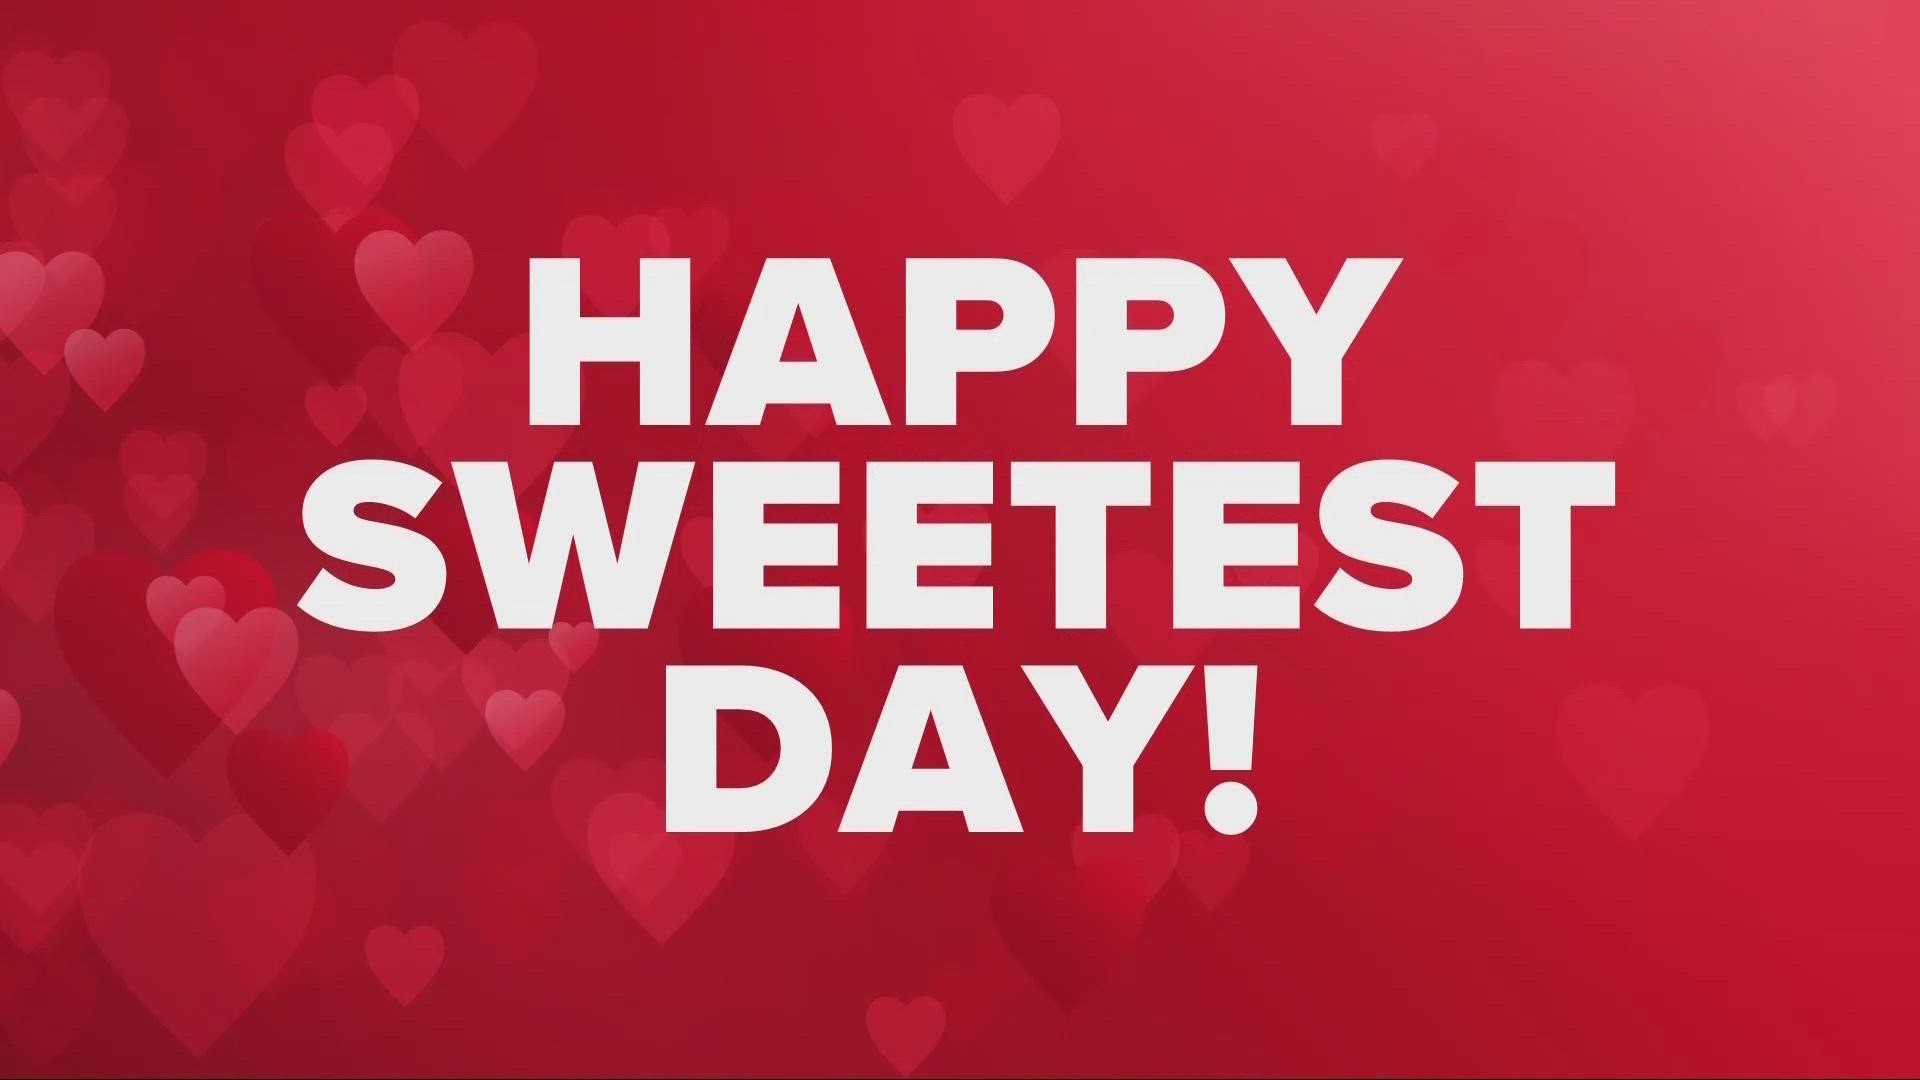 Saturday marks Sweetest Day. Mike Polk Jr. is here to share some misconceptions about the holiday.